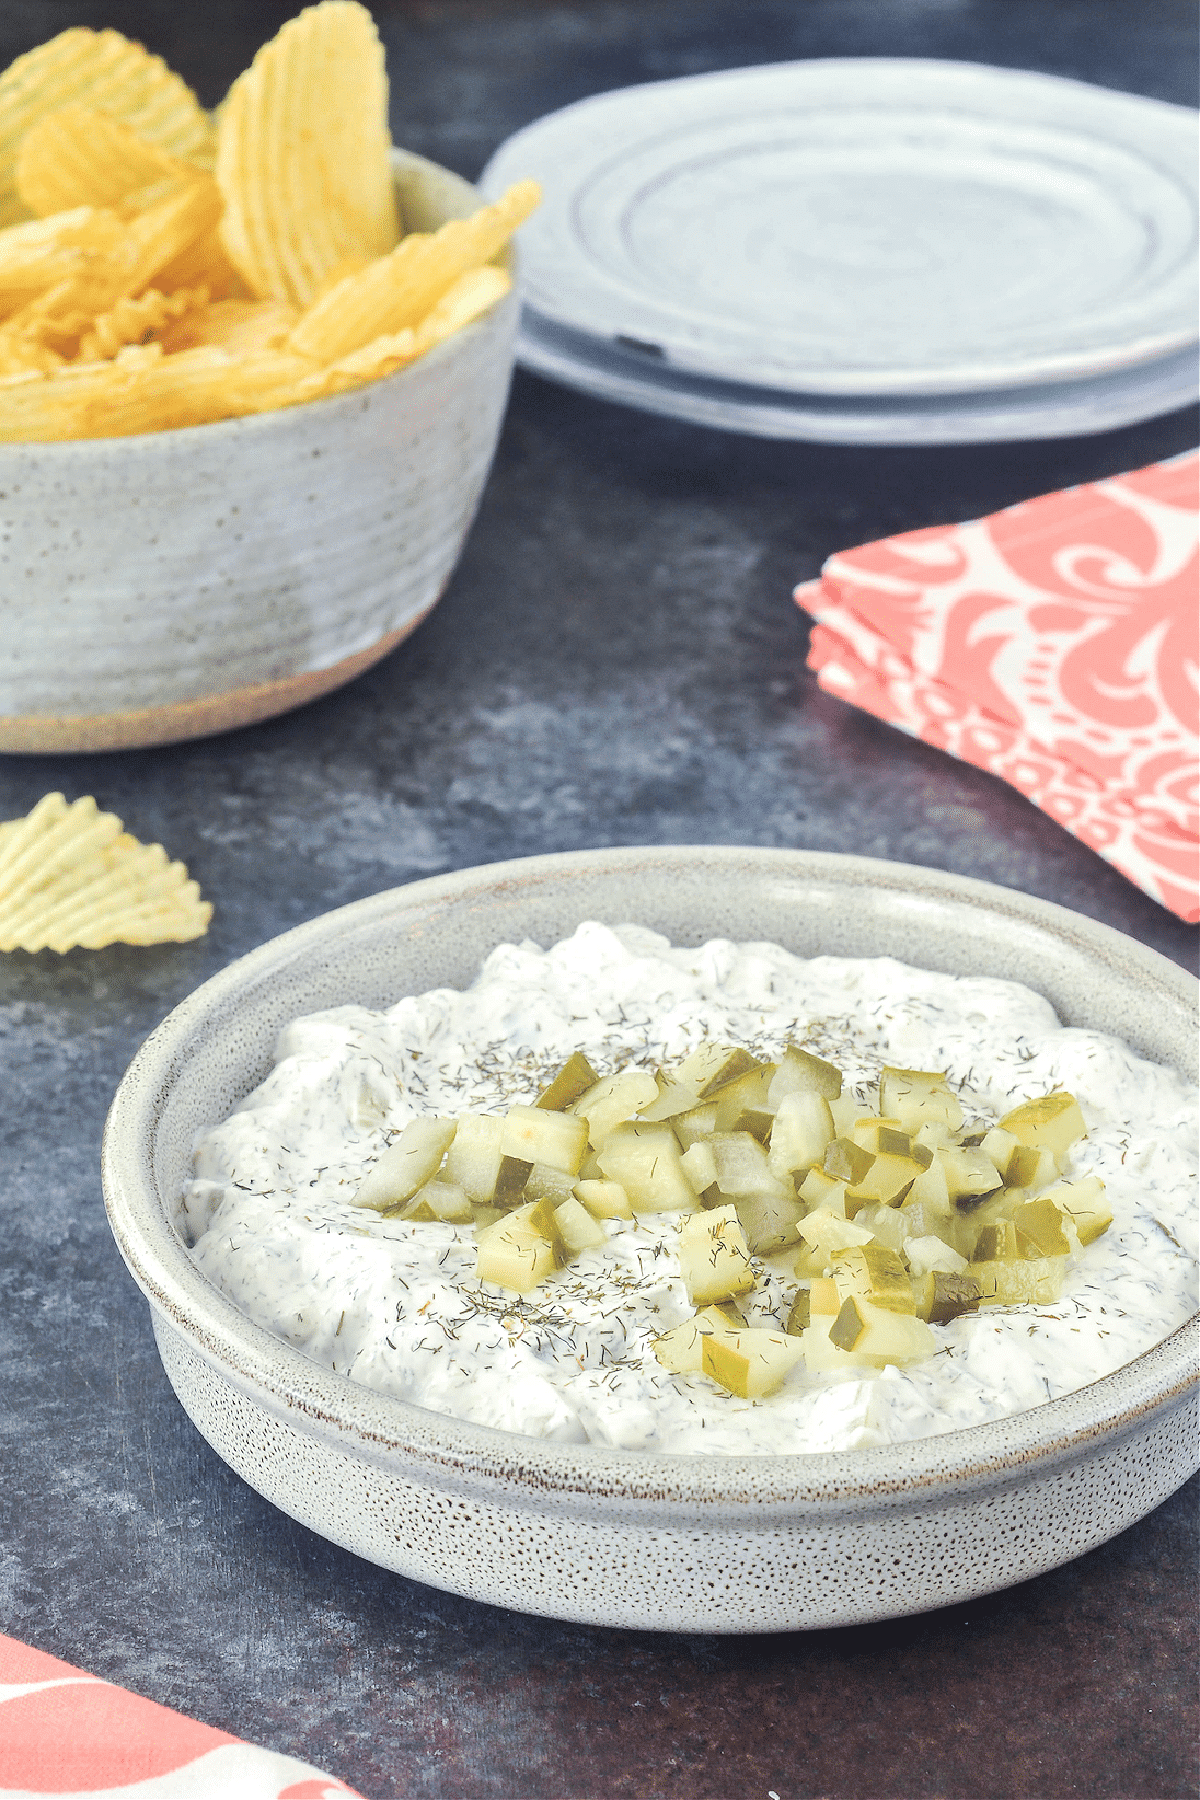 Dill pickle dip in a shallow bowl, with a second bowl of ruffled potato chips for dipping.